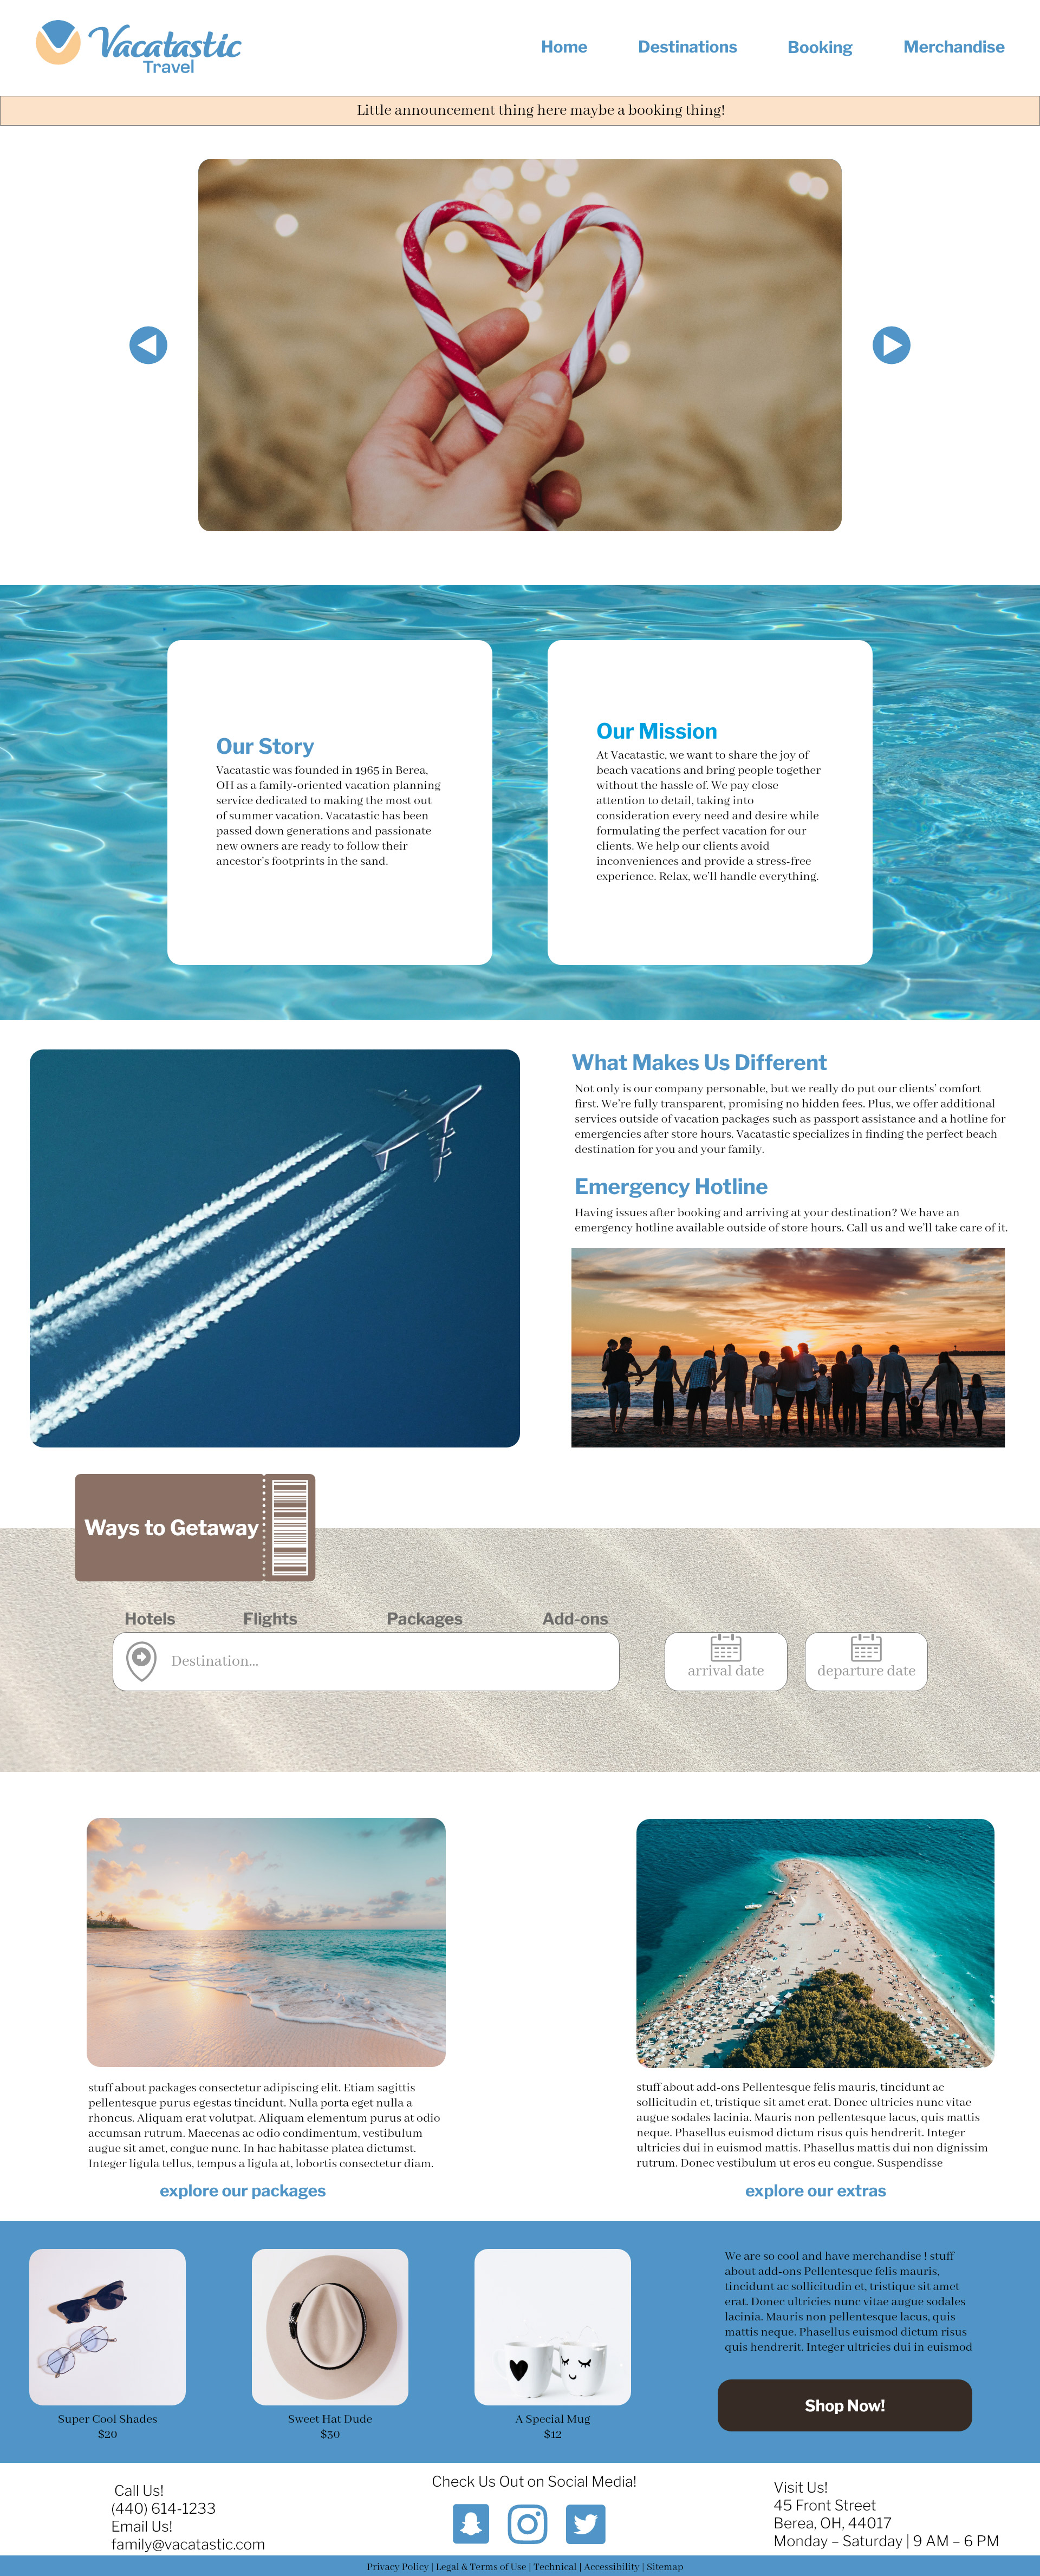 Wireframe of one-page Vacatastic website